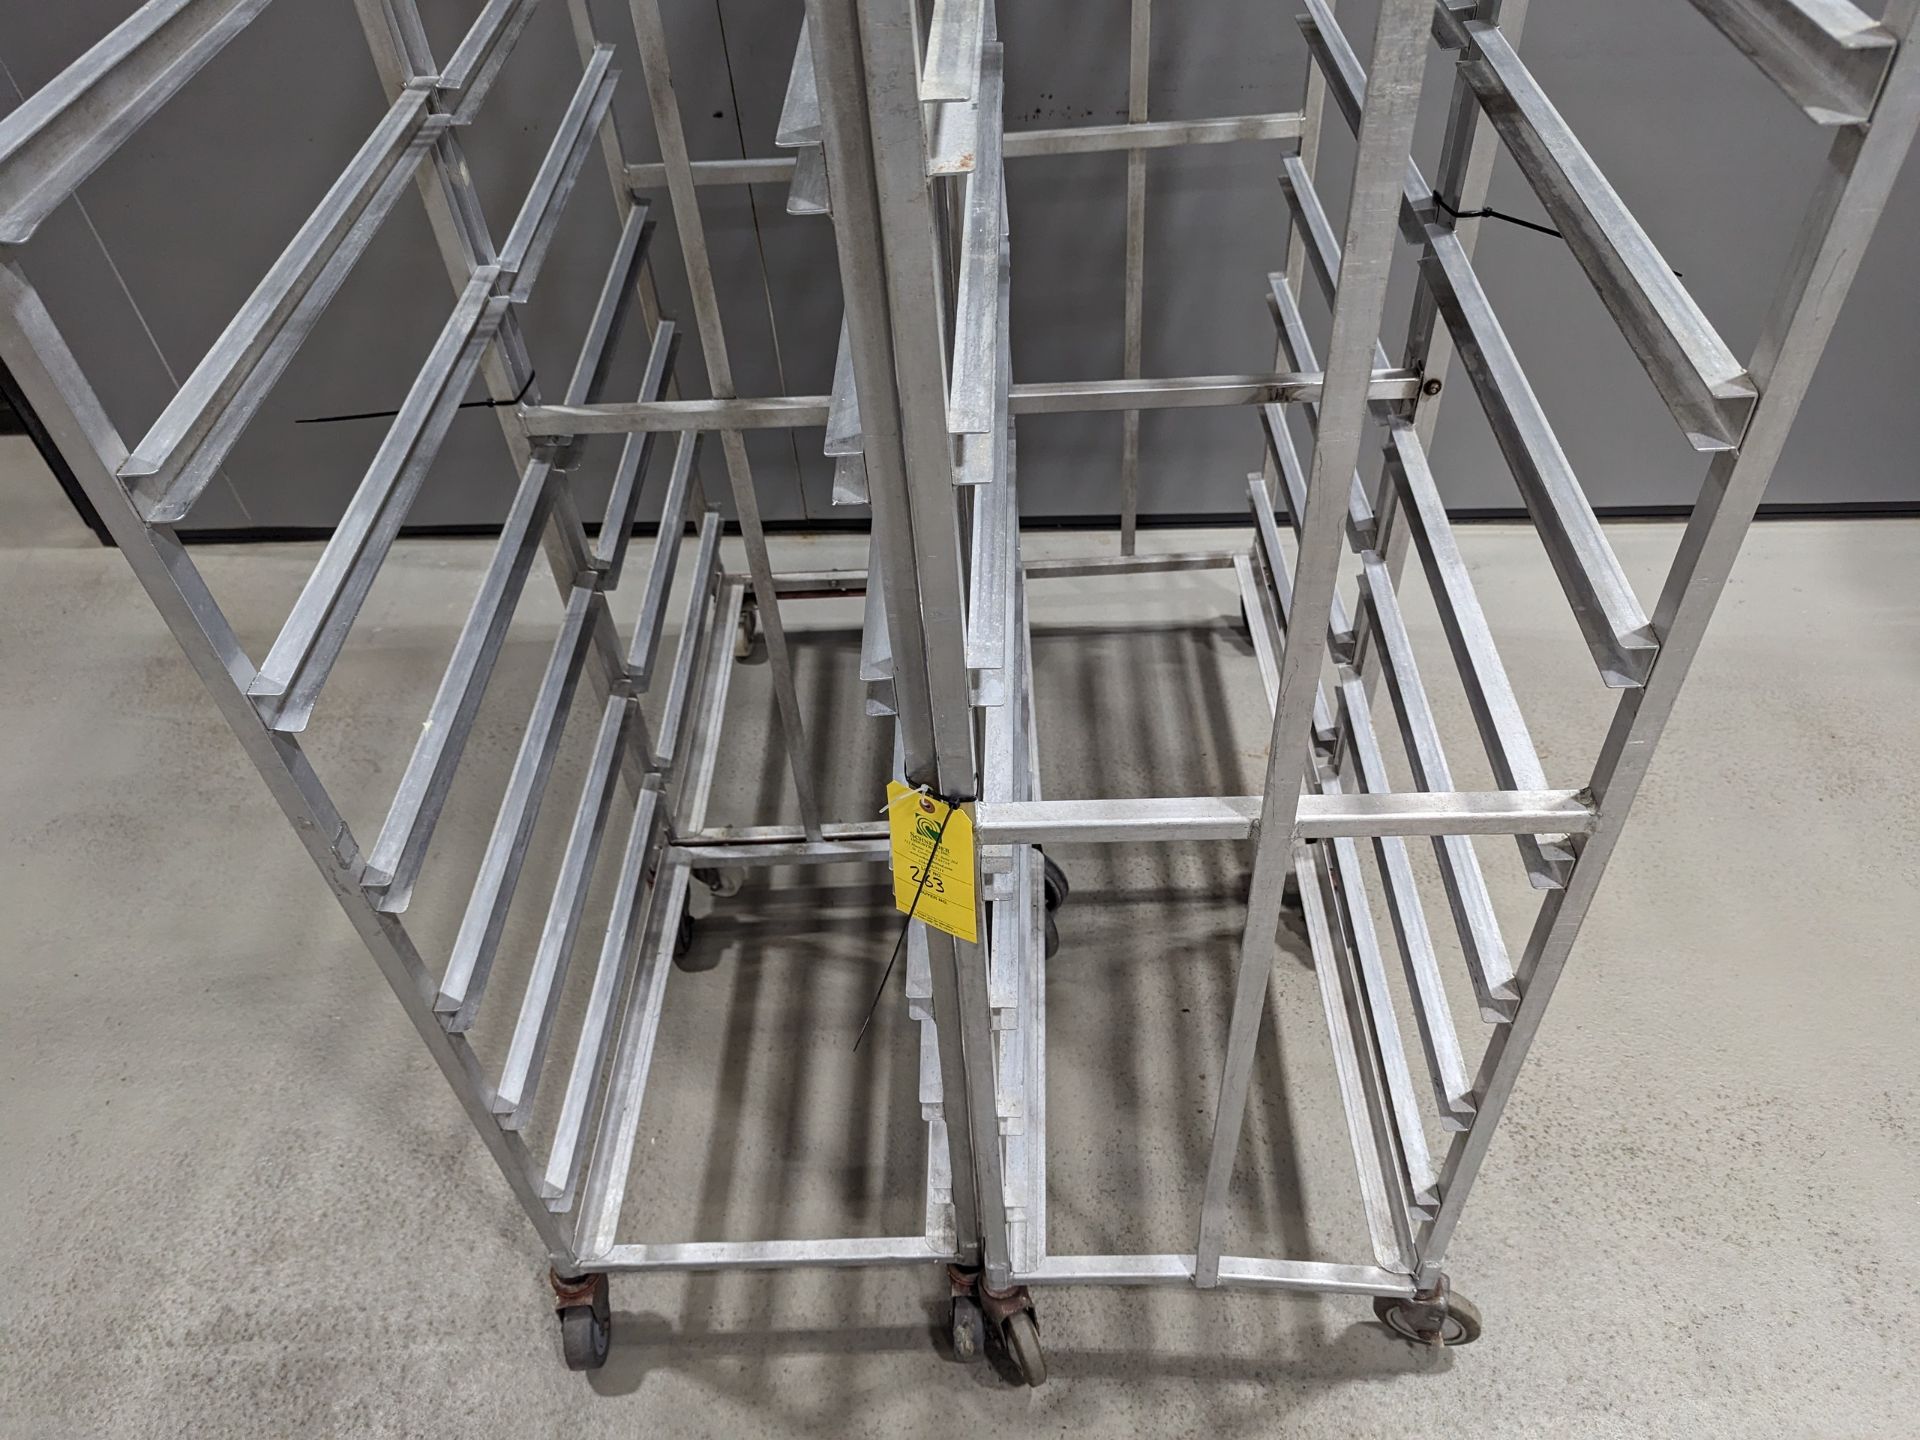 Lot of 4 Single Wide Aluminum Bakery Racks, Dimensions LxWxH: 57x37.5x69 Measurements are for lot - Image 7 of 7